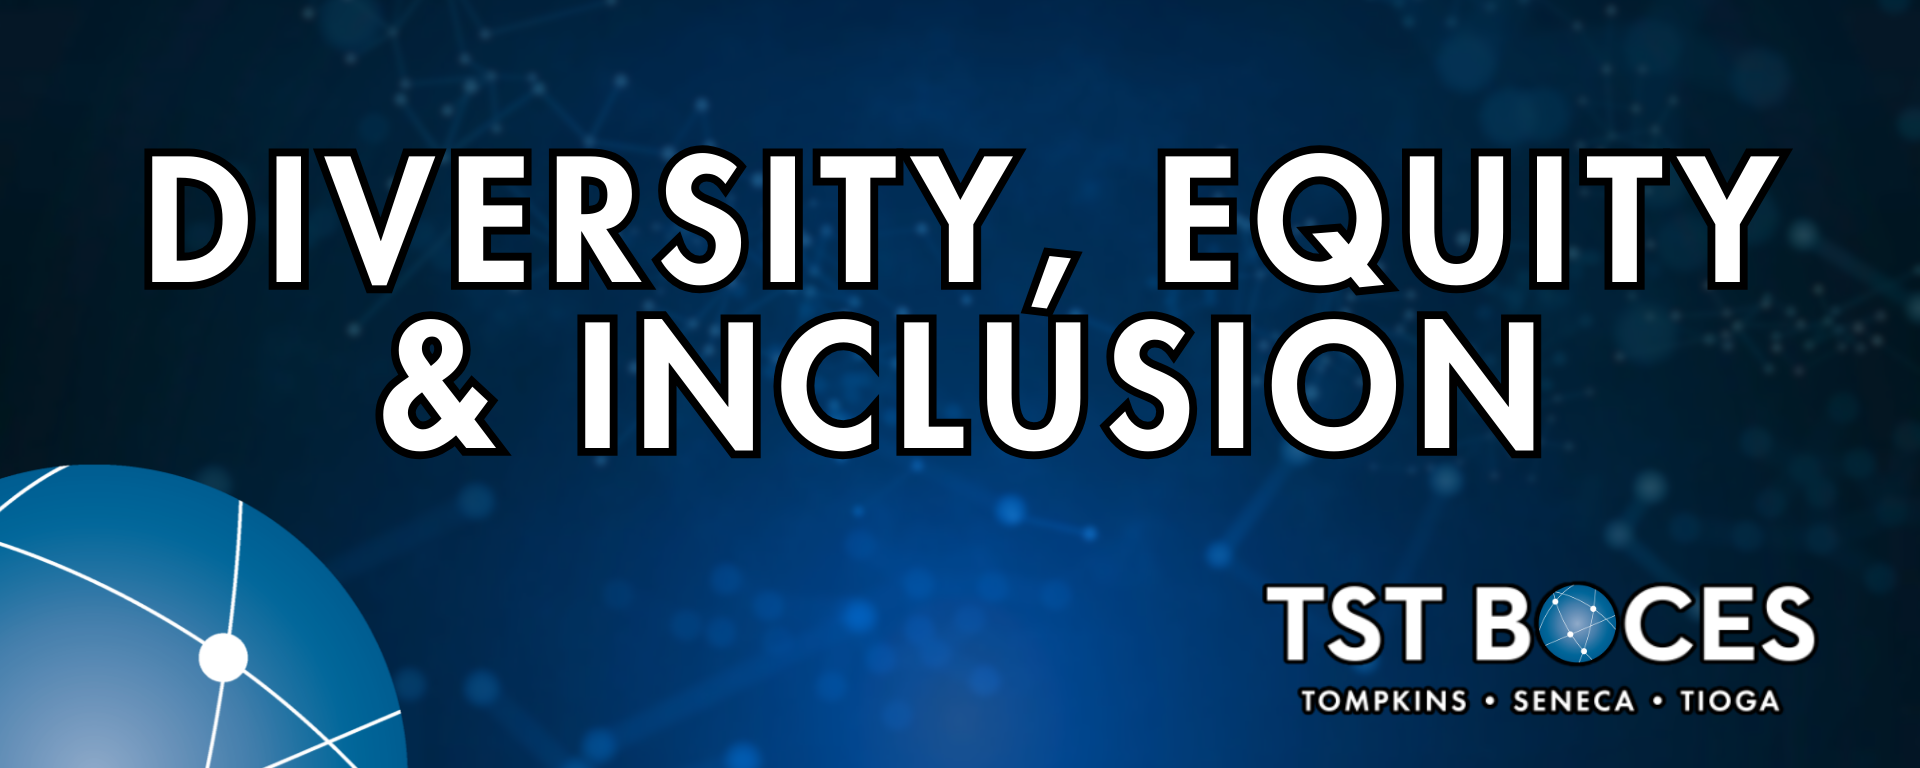 Diversity, equity, and inclusion banner